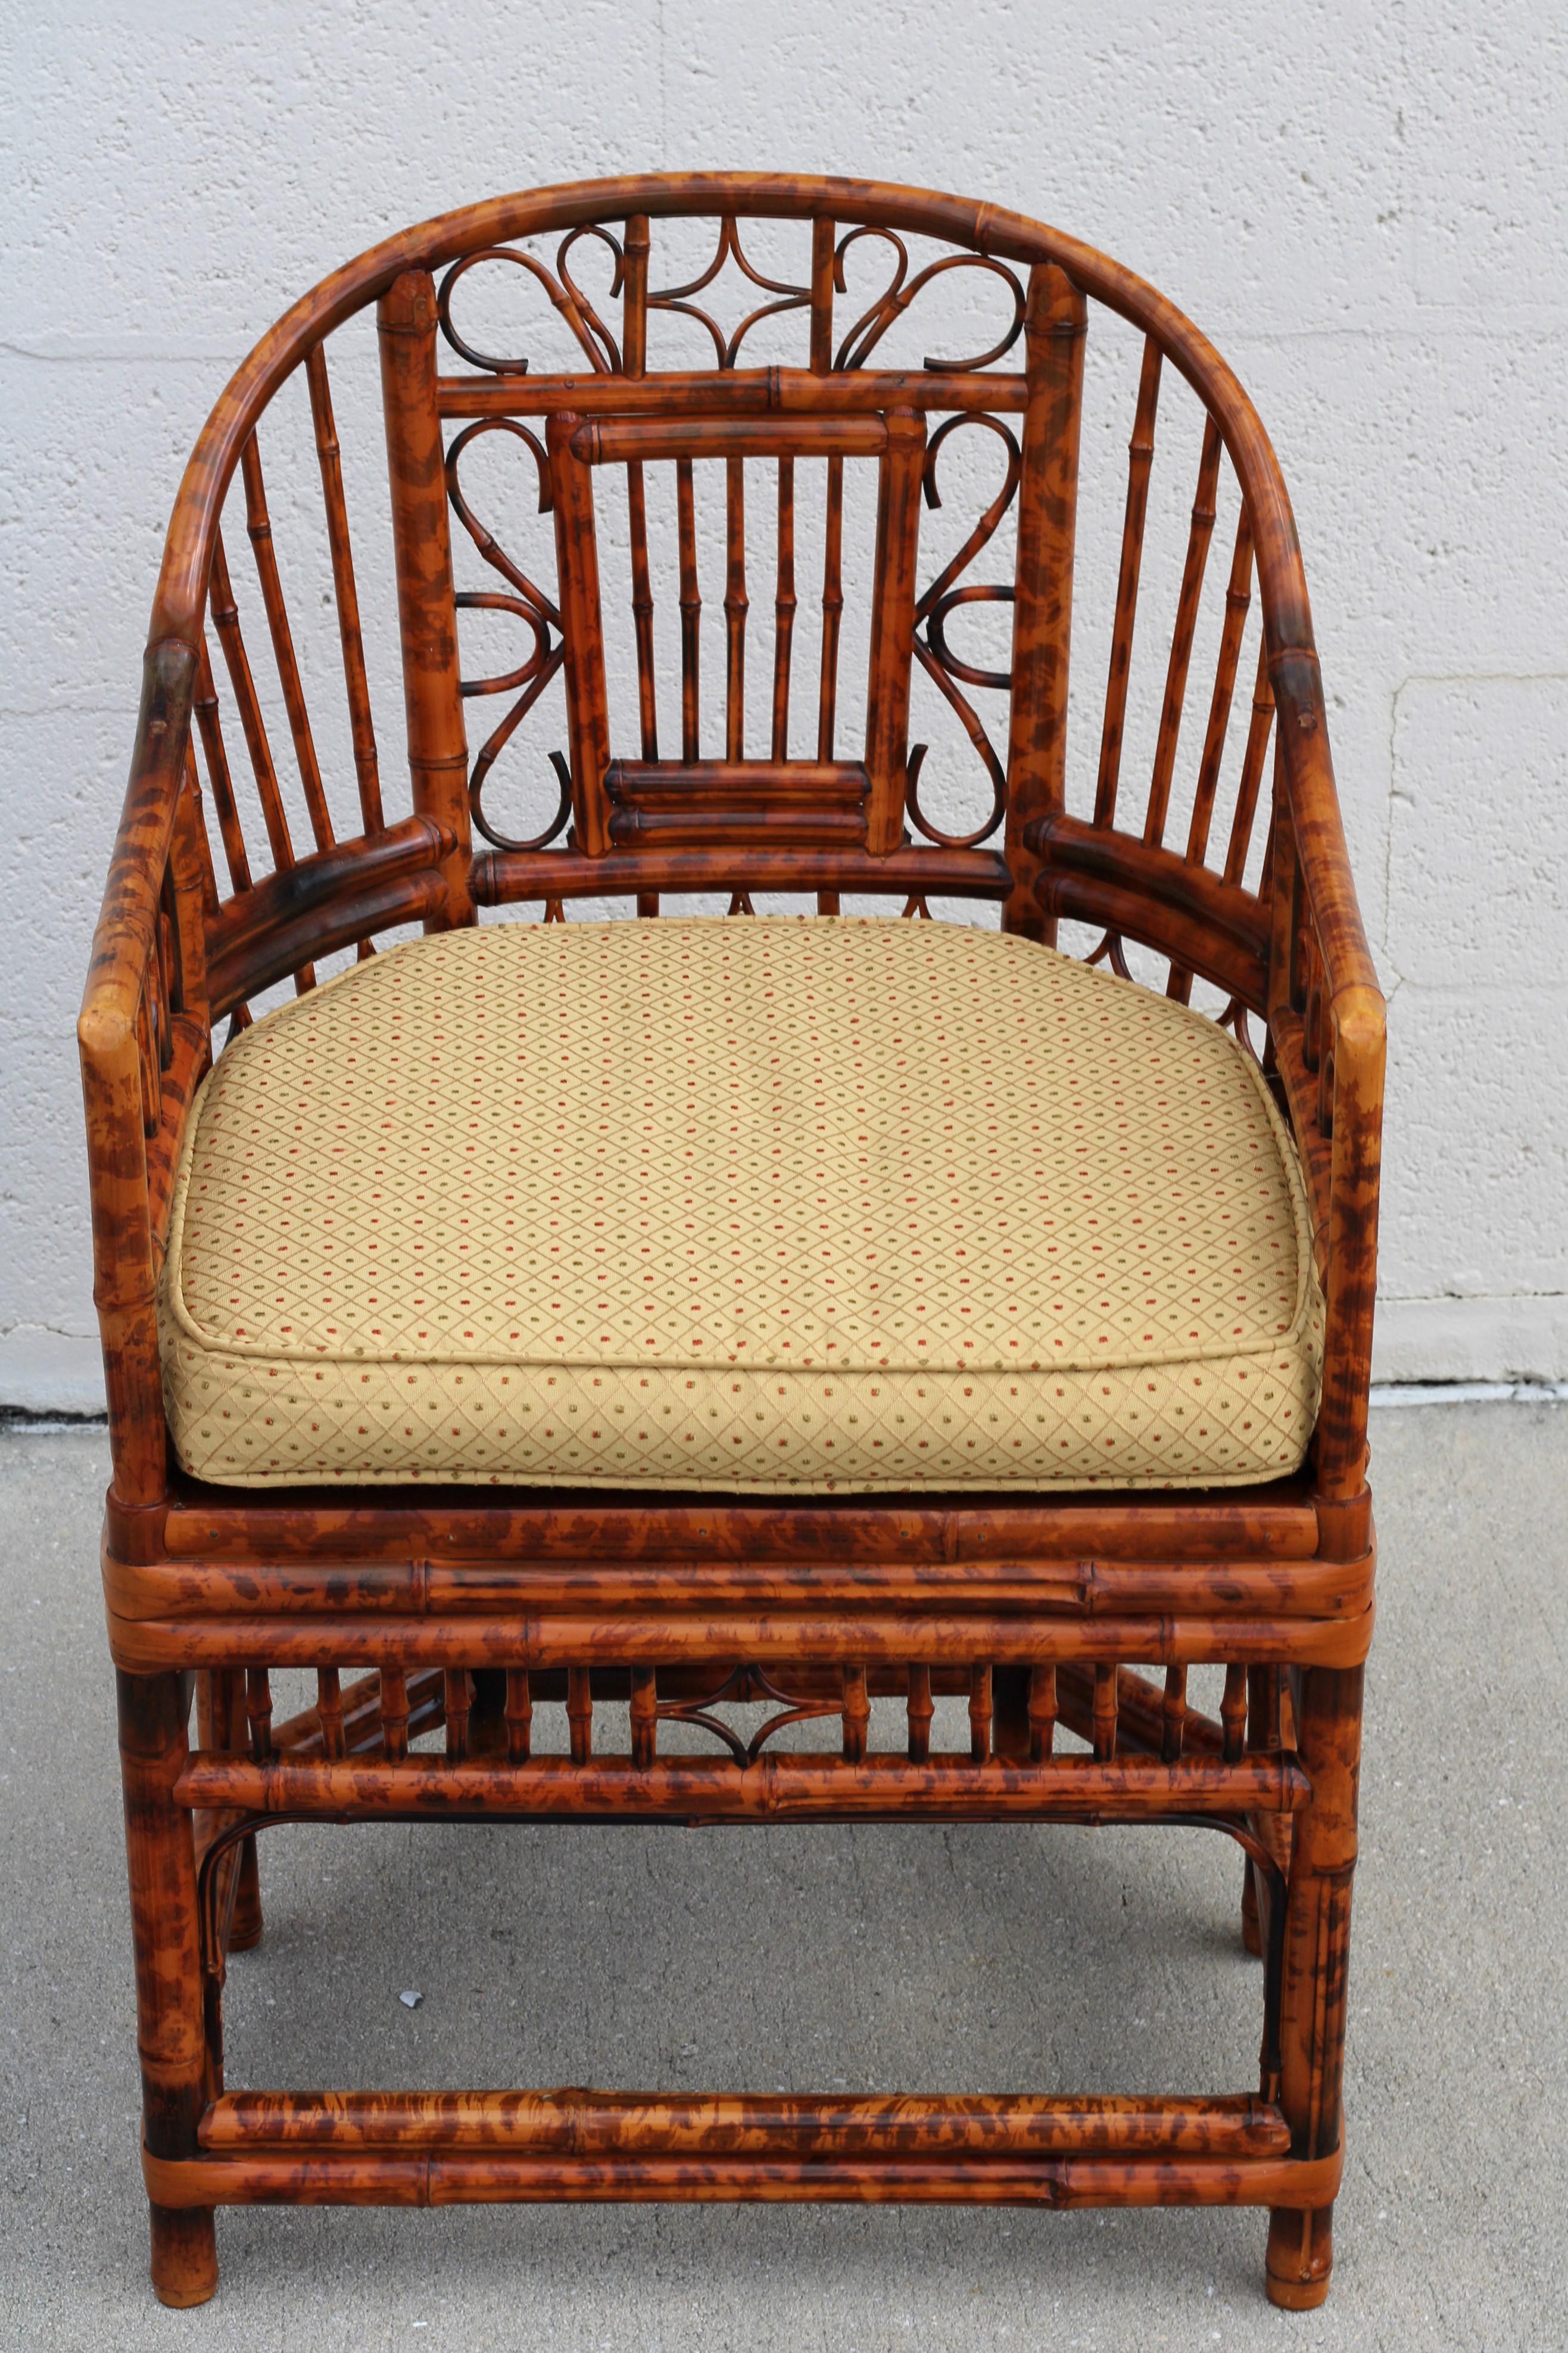 Brighton Pavilion Style Tortoiseshell Burnt Bamboo Cane Armchairs, a Pair In Good Condition For Sale In Vero Beach, FL